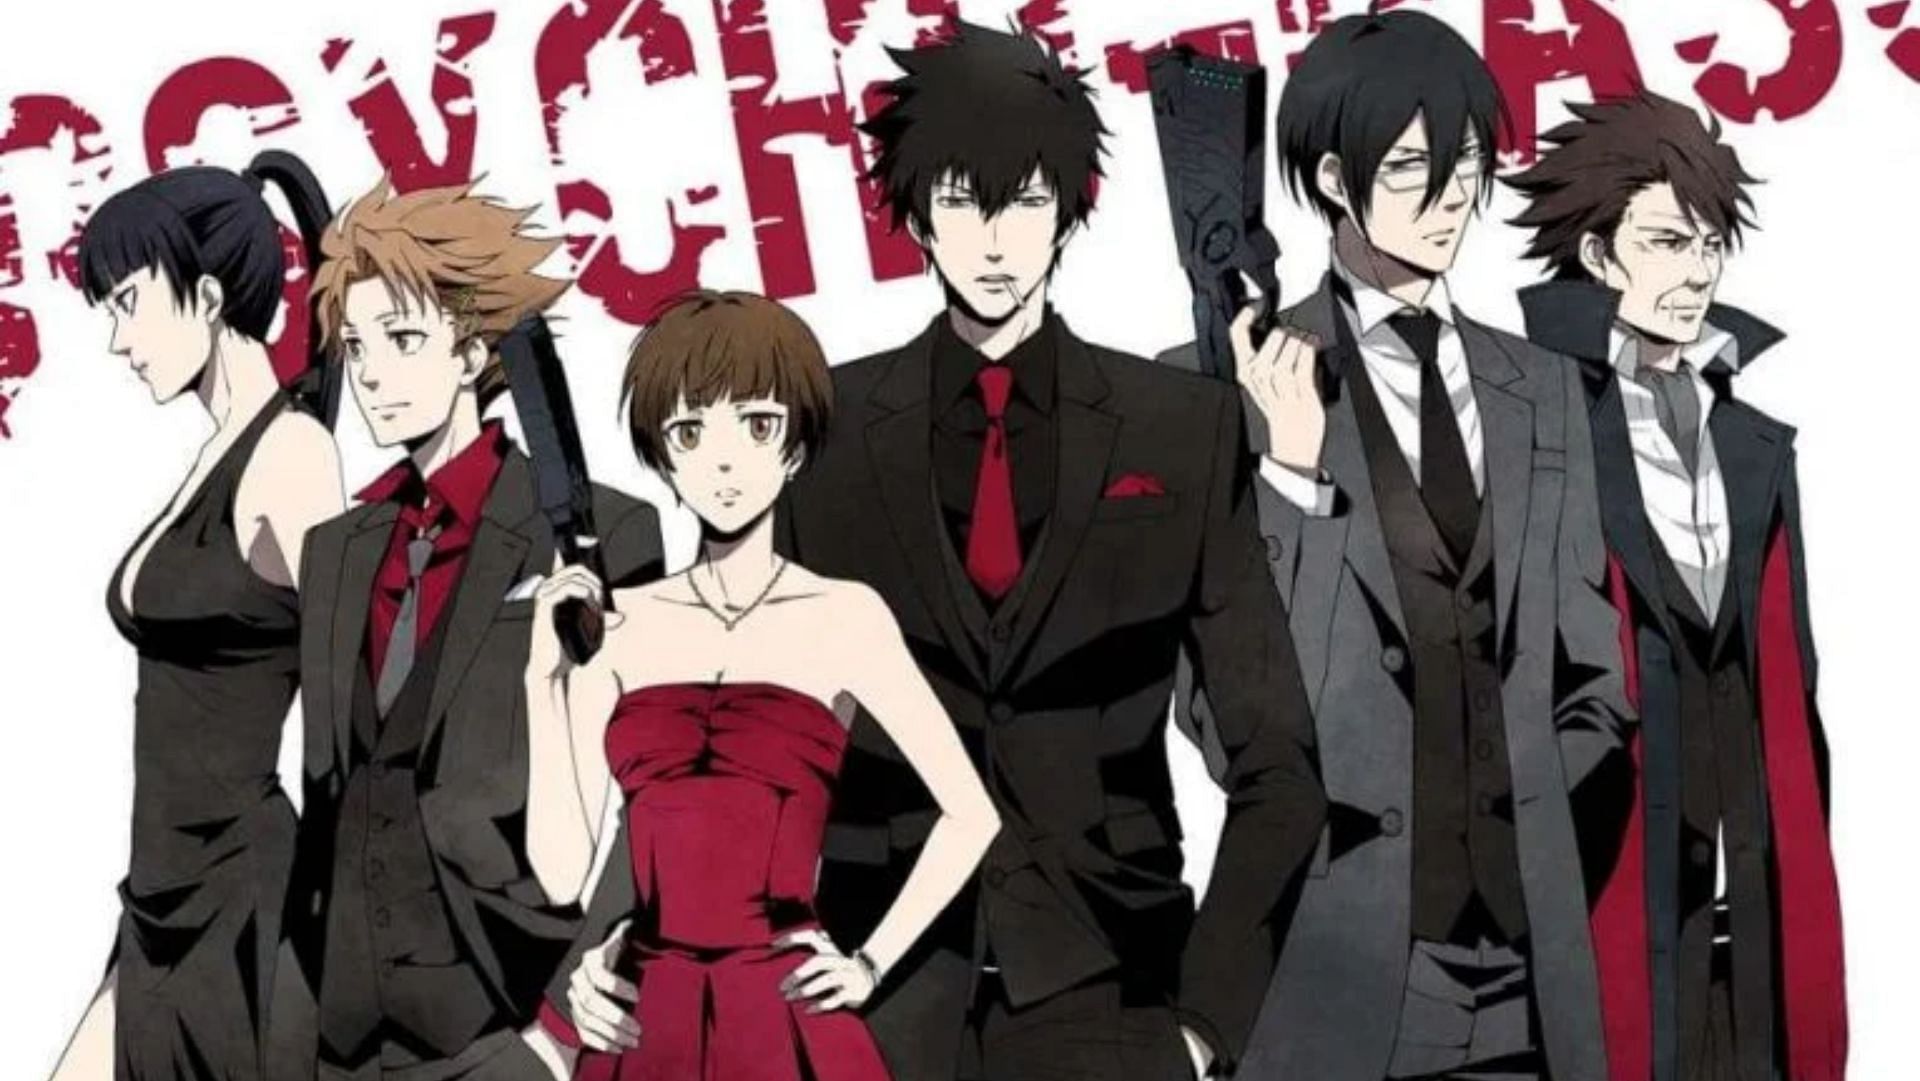 All main characters of Psycho-Pass as seen in the anime (Image via Funimation/Production I.G)